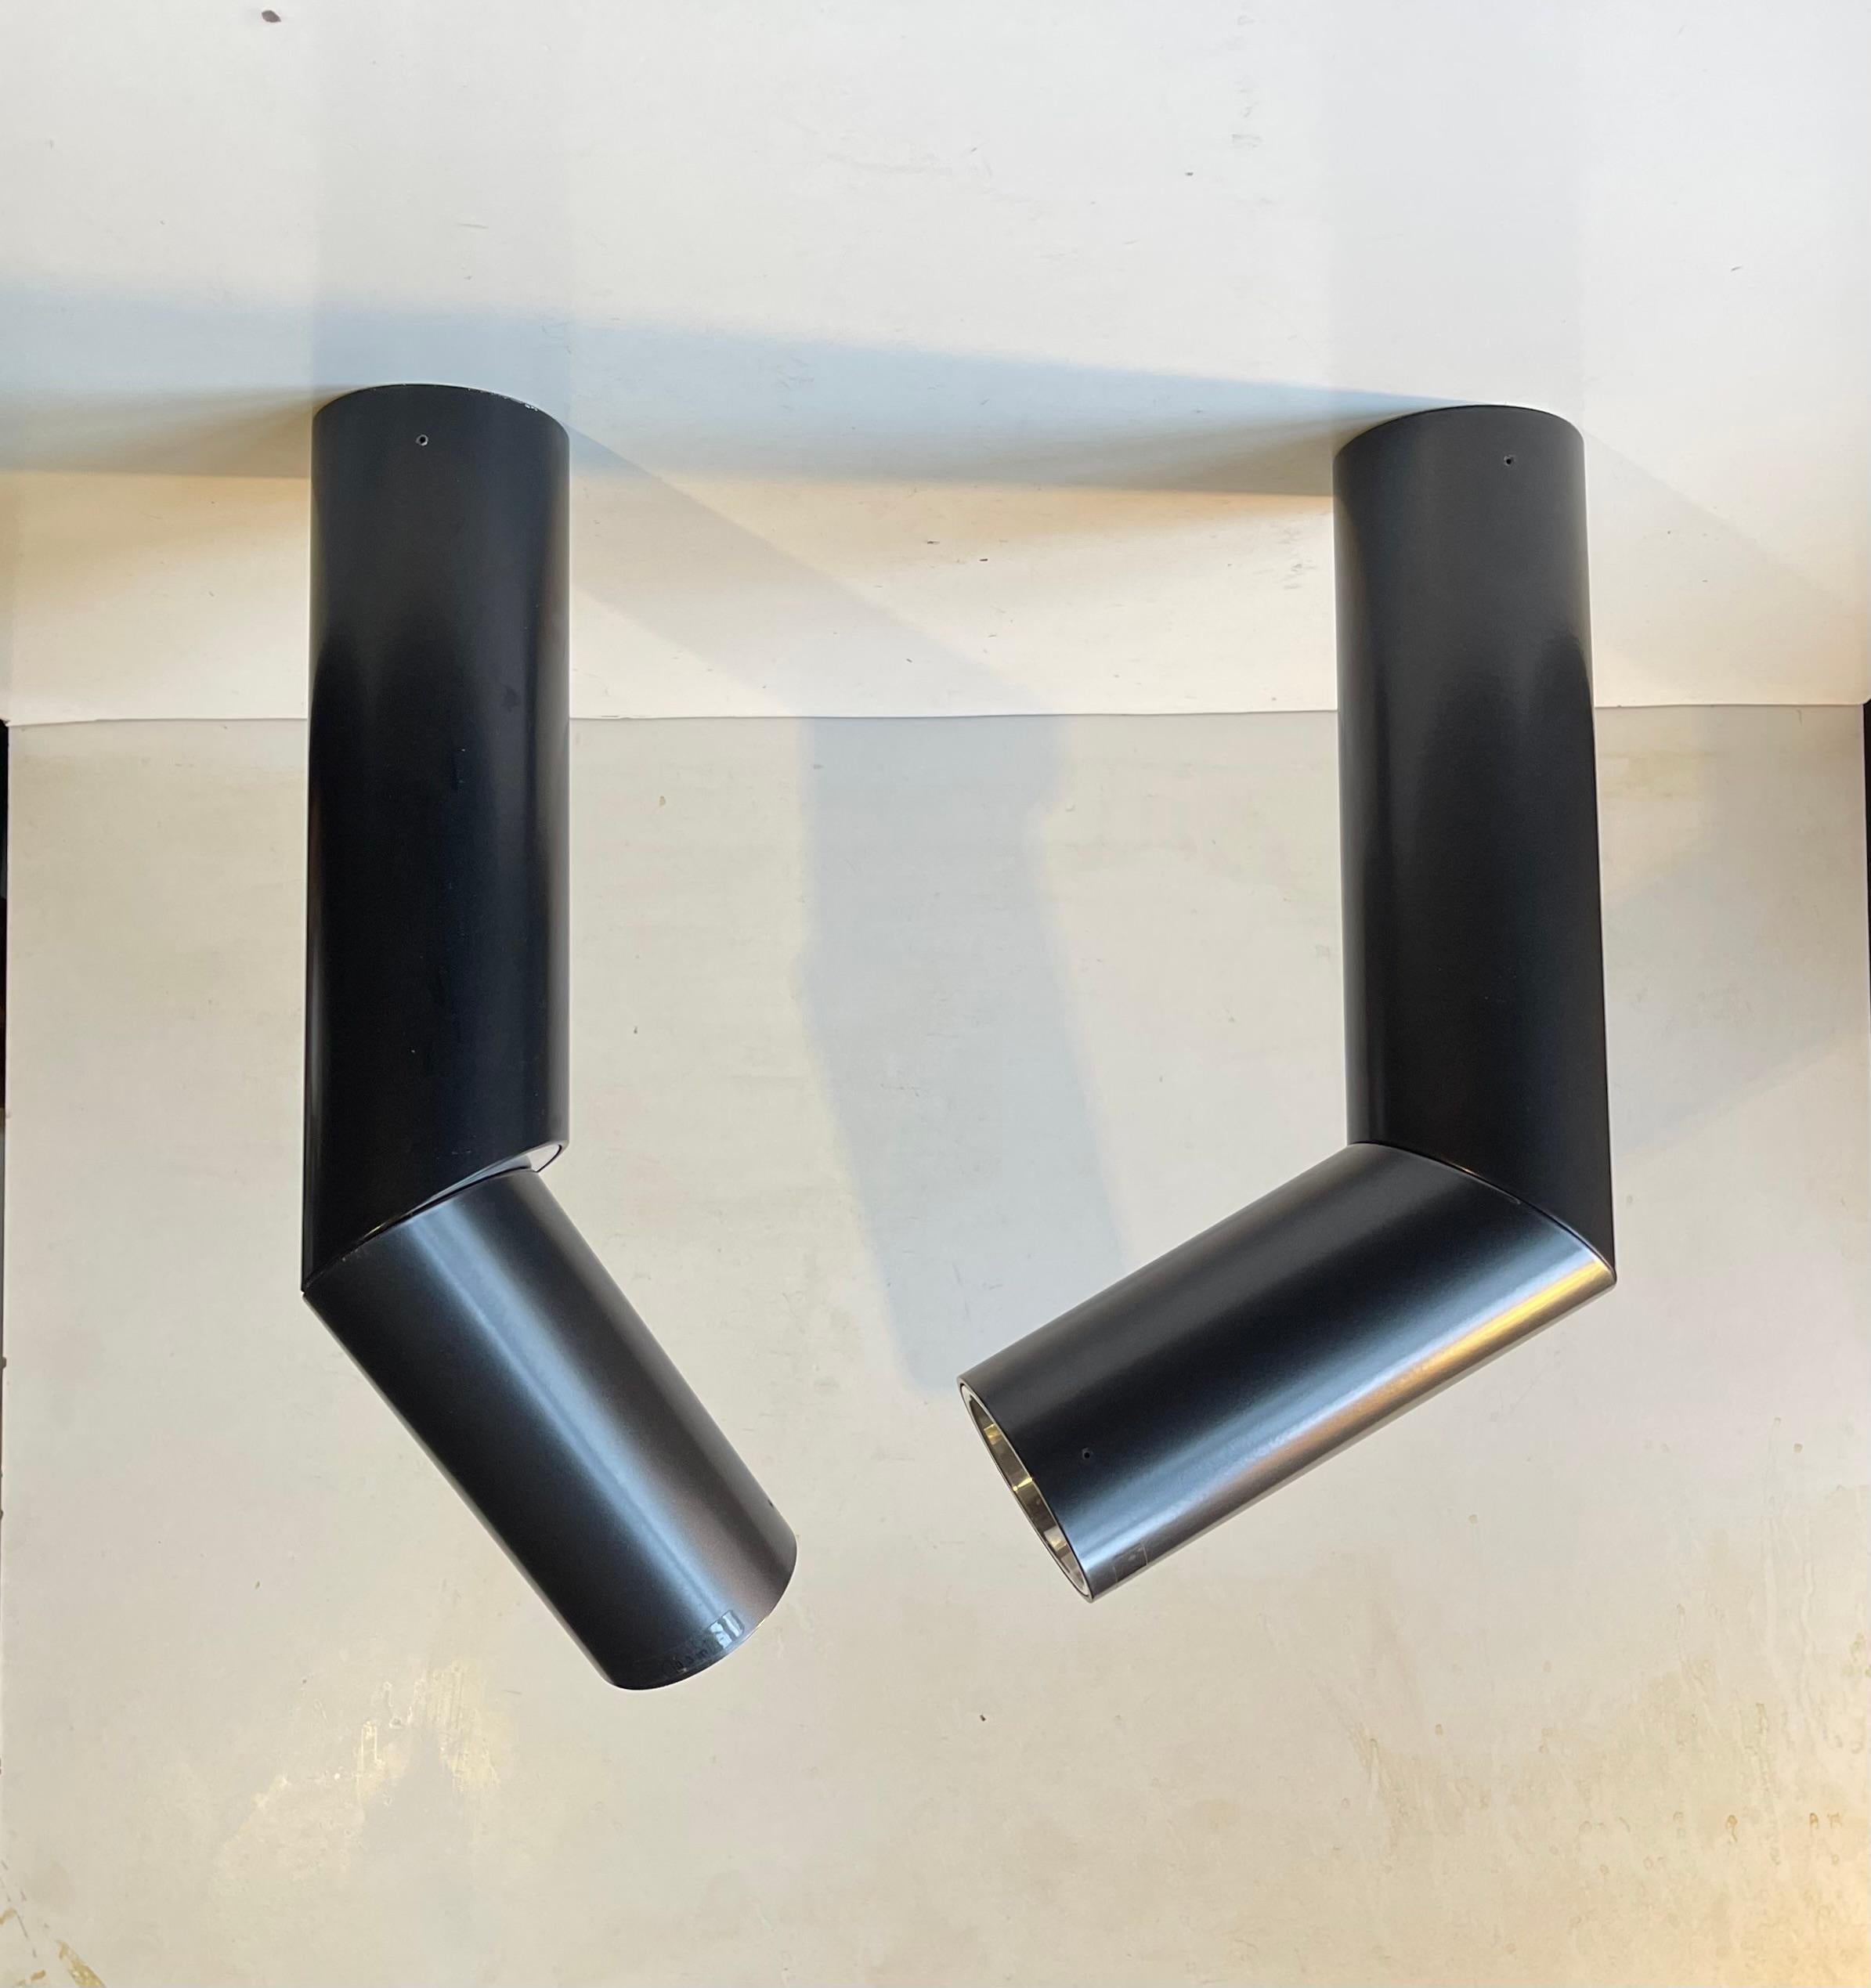 Satin Black E06 Minimalist Ceiling or Wall Lamps by Luceplan Italy In Good Condition For Sale In Esbjerg, DK